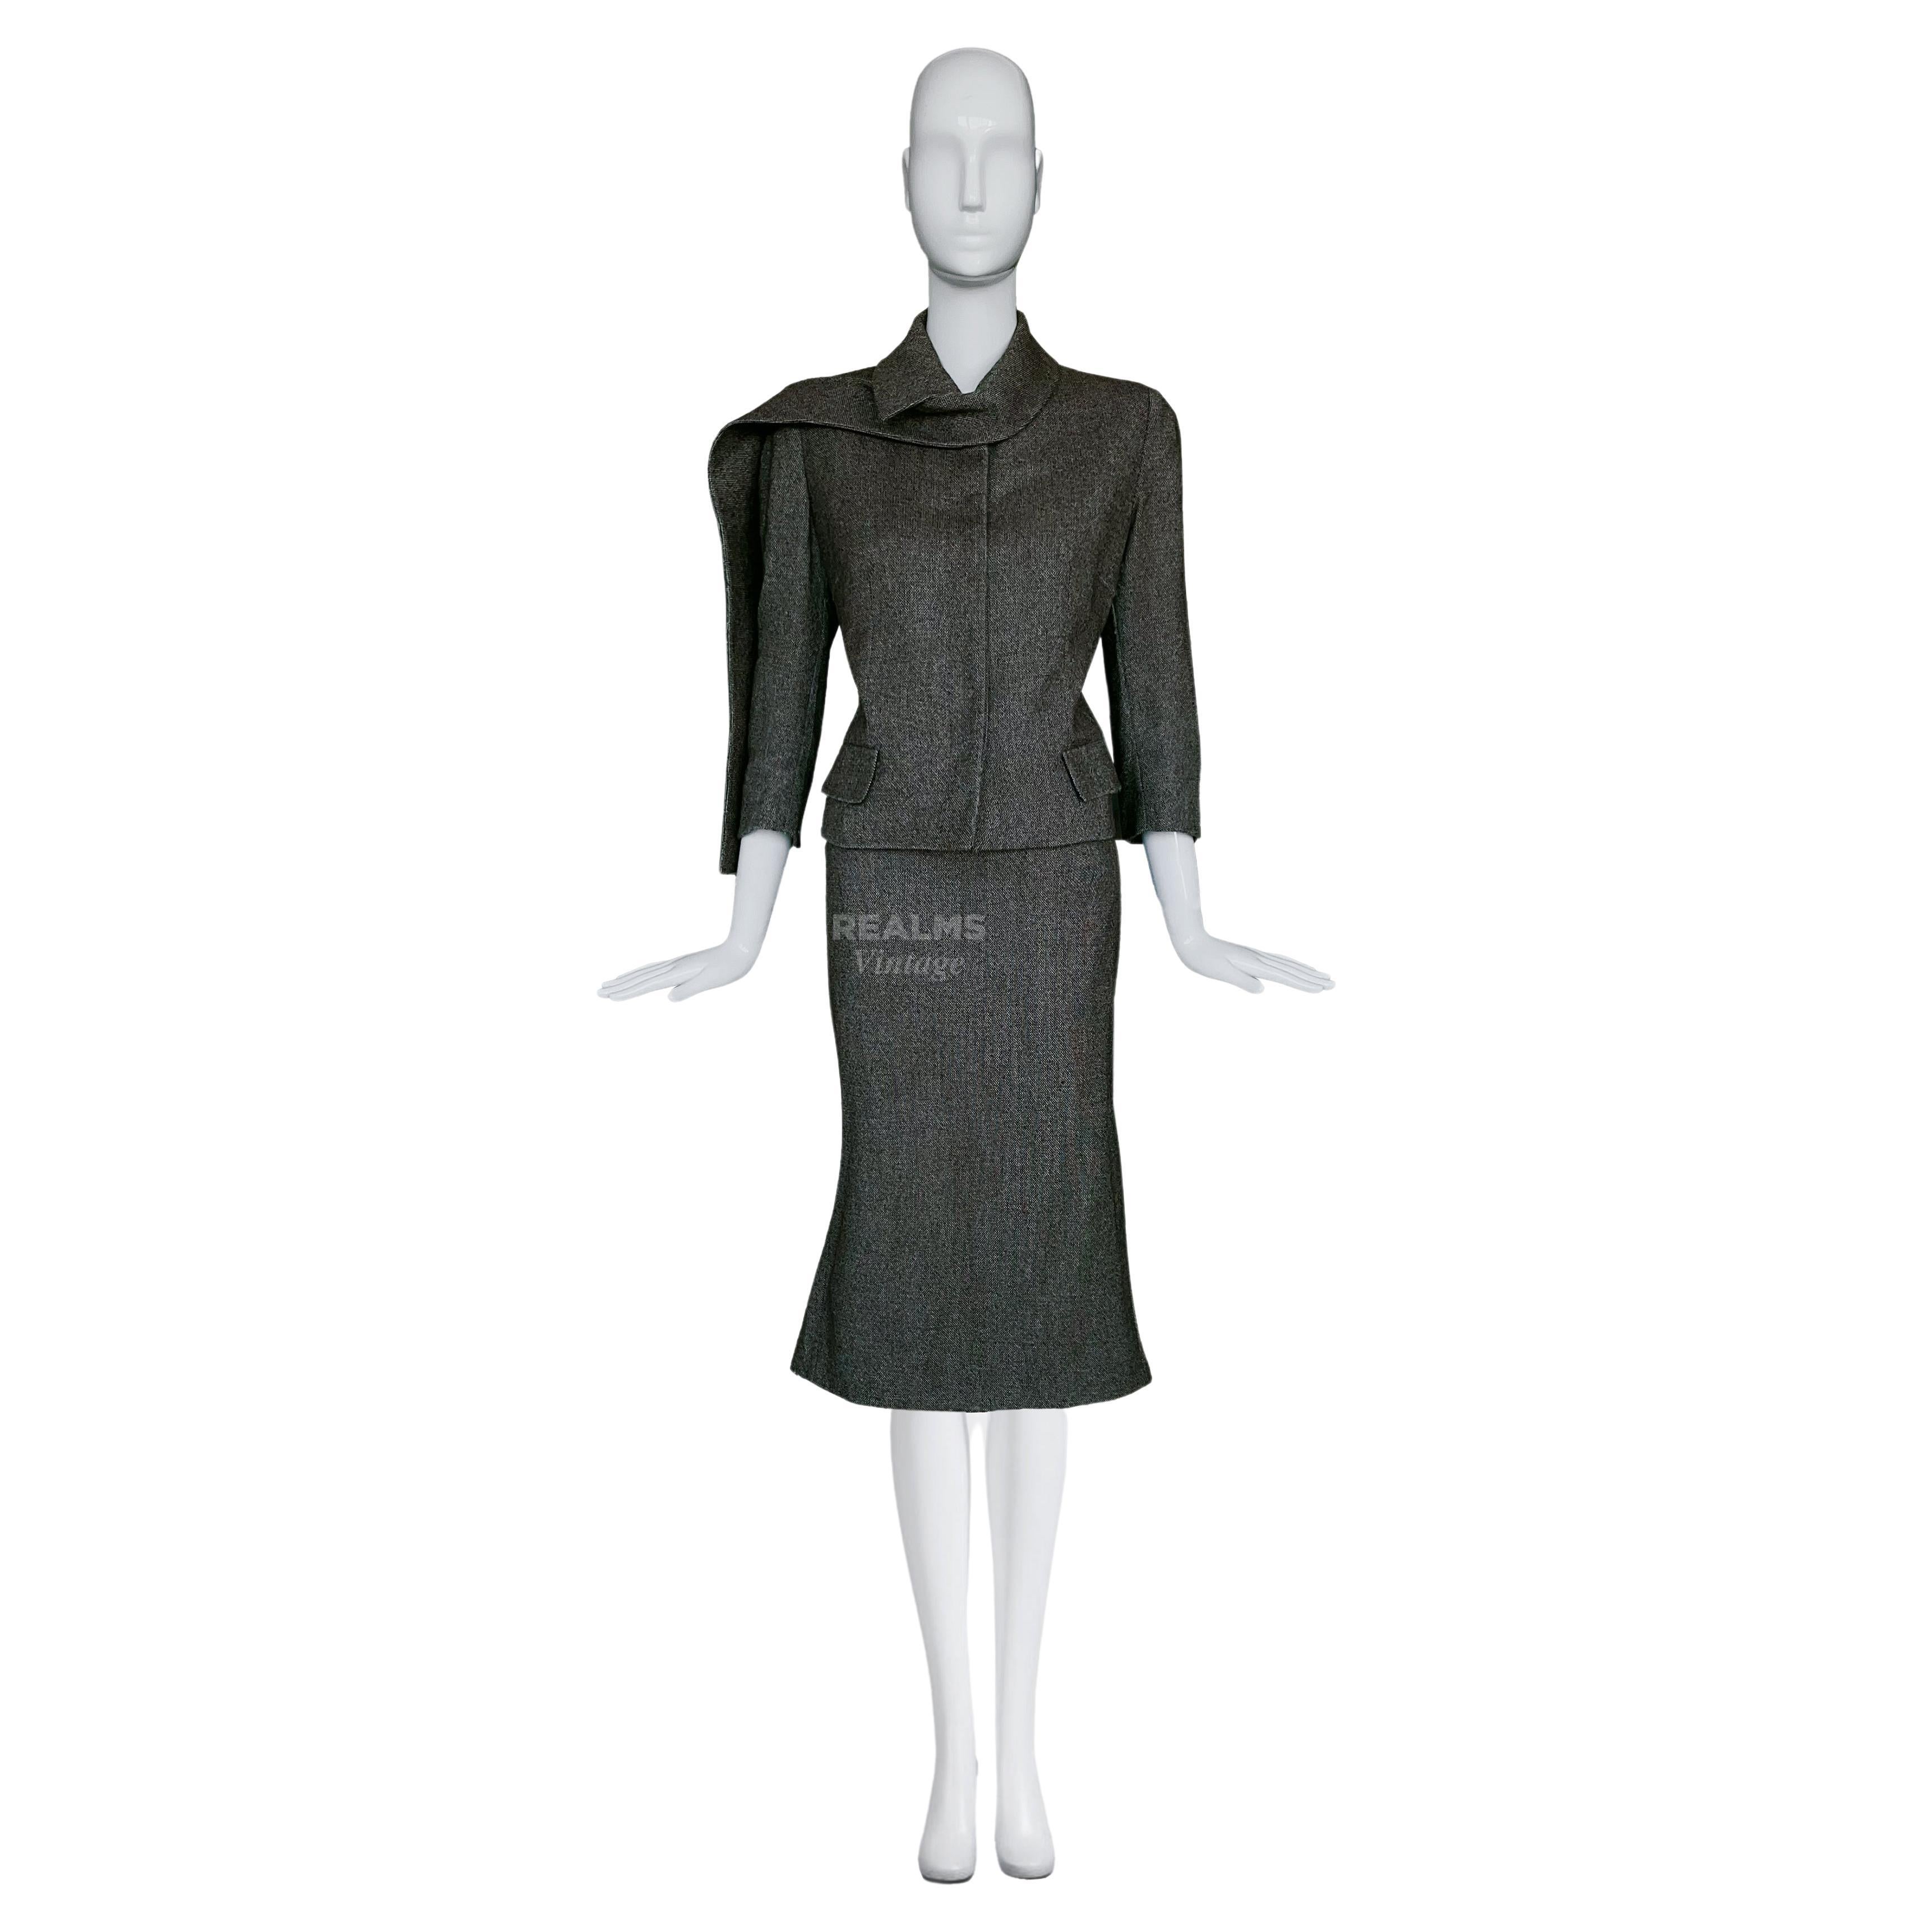 Alexander McQueen Archival FW 2005 'The Man Who Knew Too Much' Wool Skirt Suit For Sale